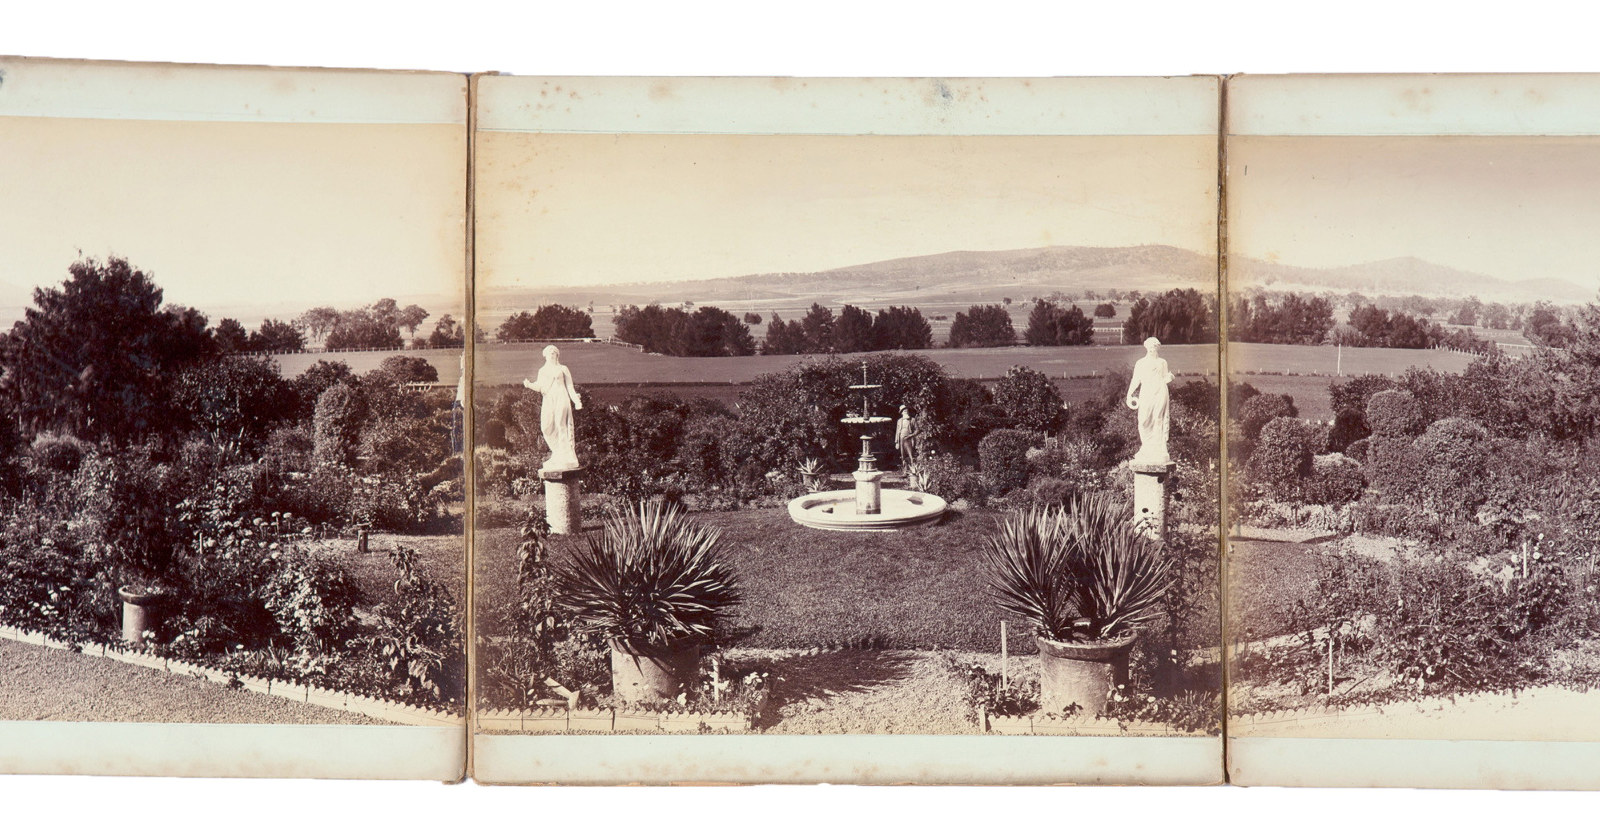 Section of 7-part photographic panorama of Turanville, Scone, 1889